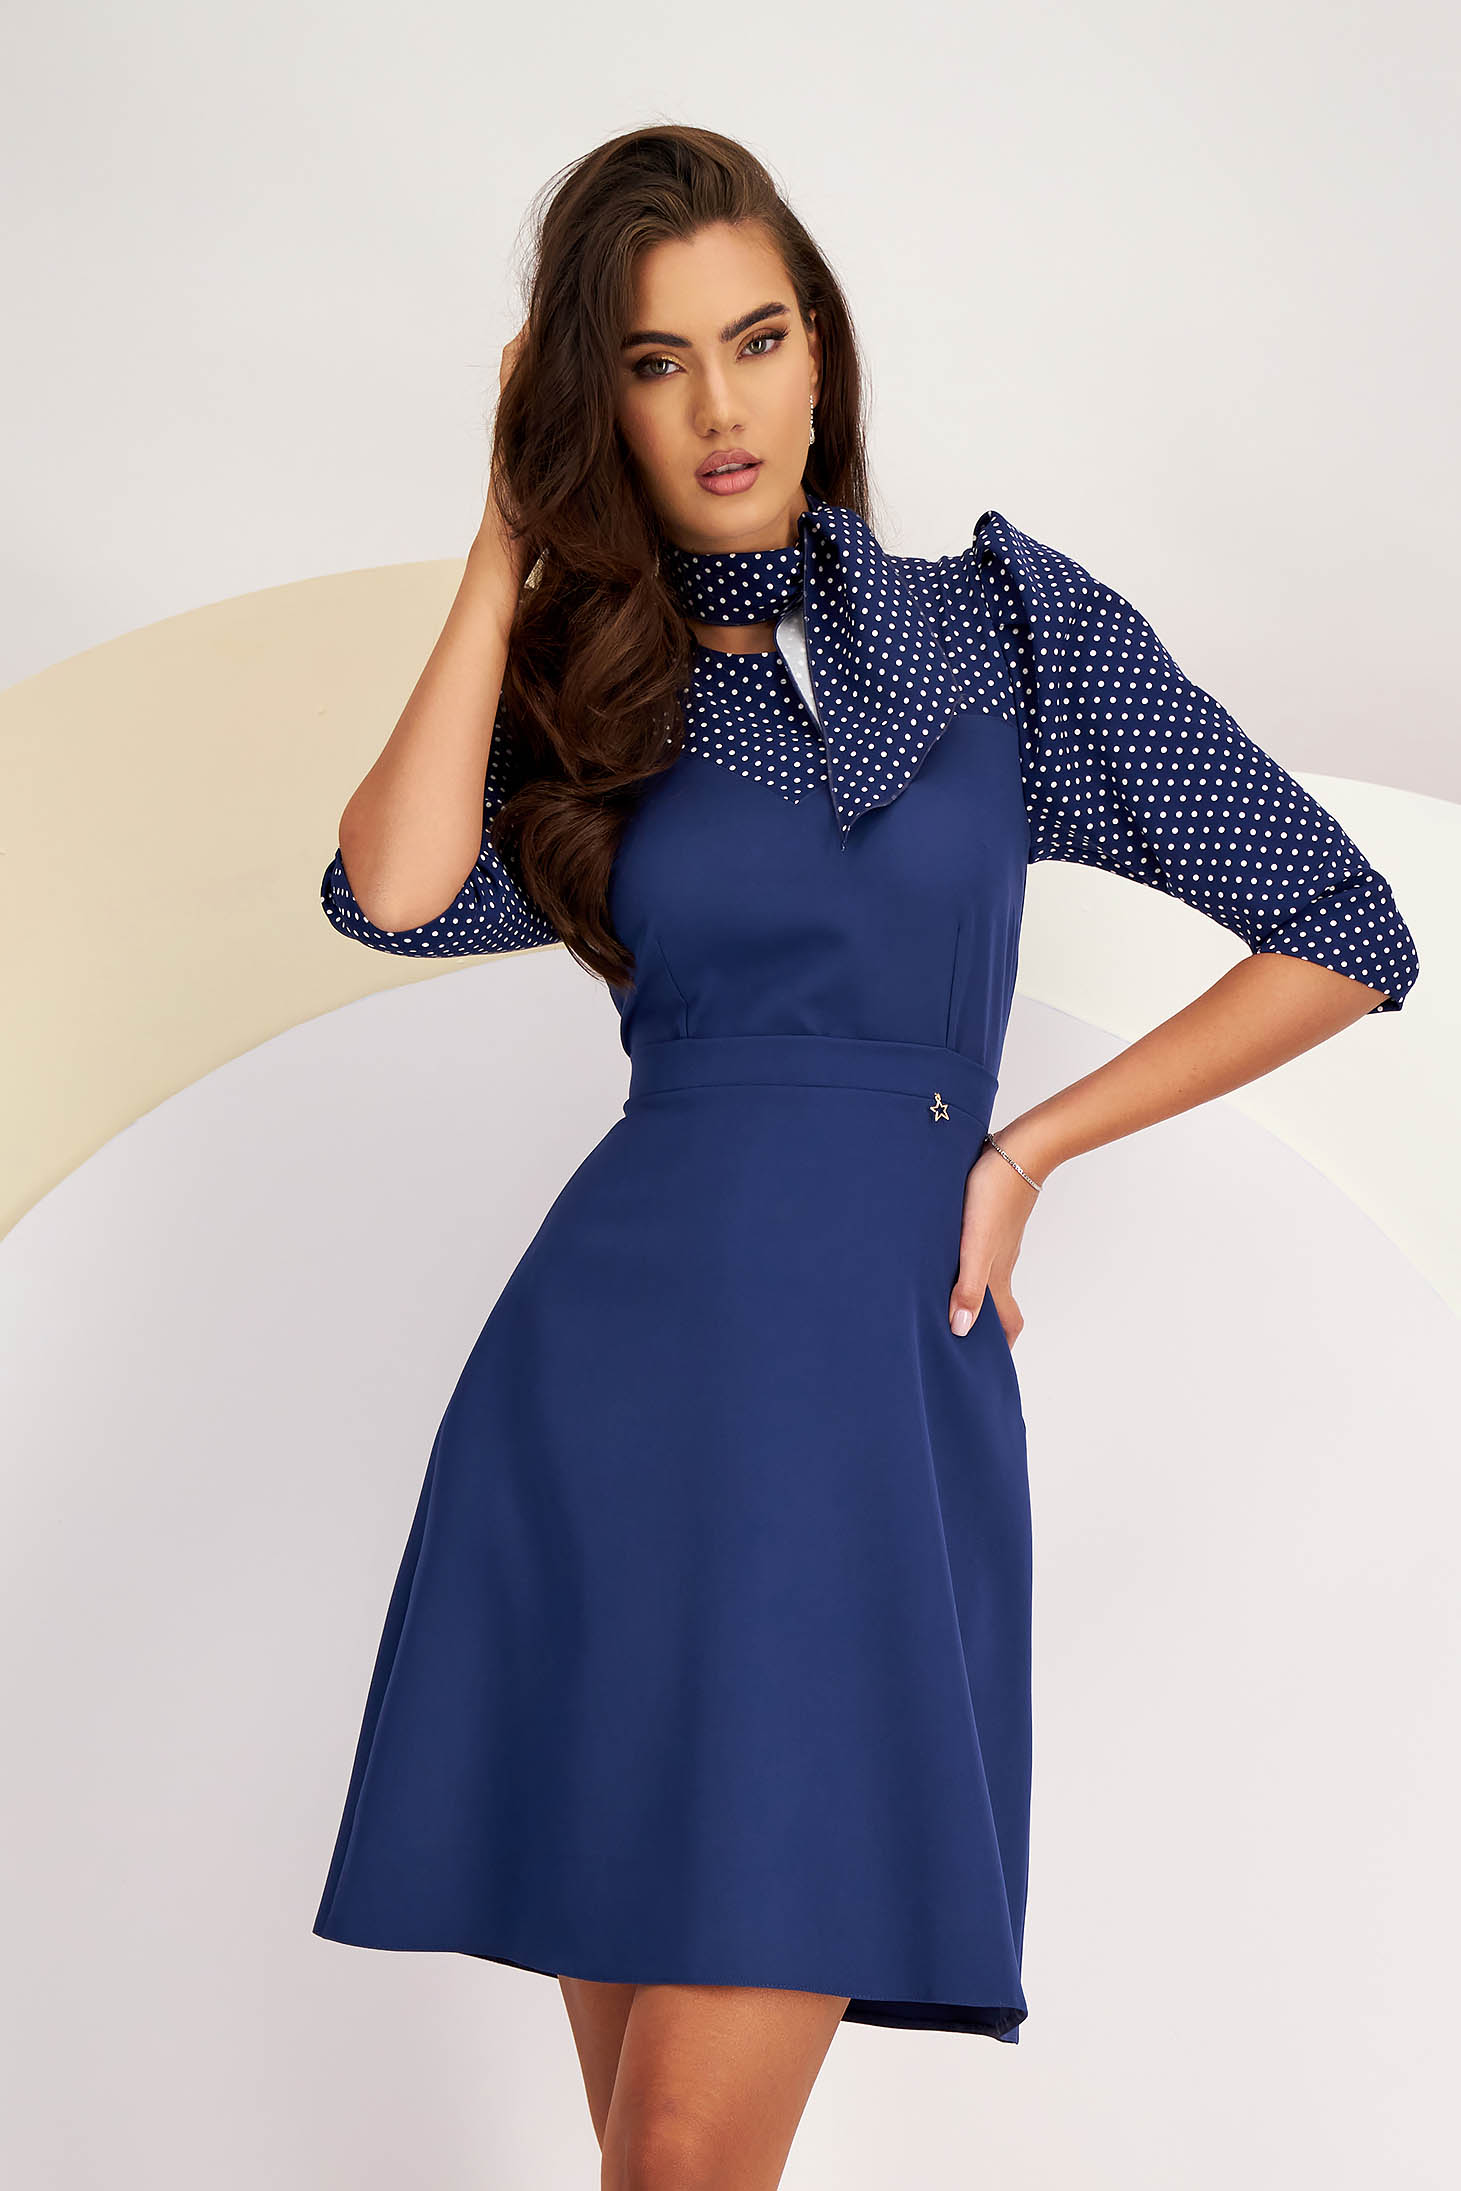 Navy Blue Short Elastic Fabric Dress in Clos with Puffy Shoulders - StarShinerS